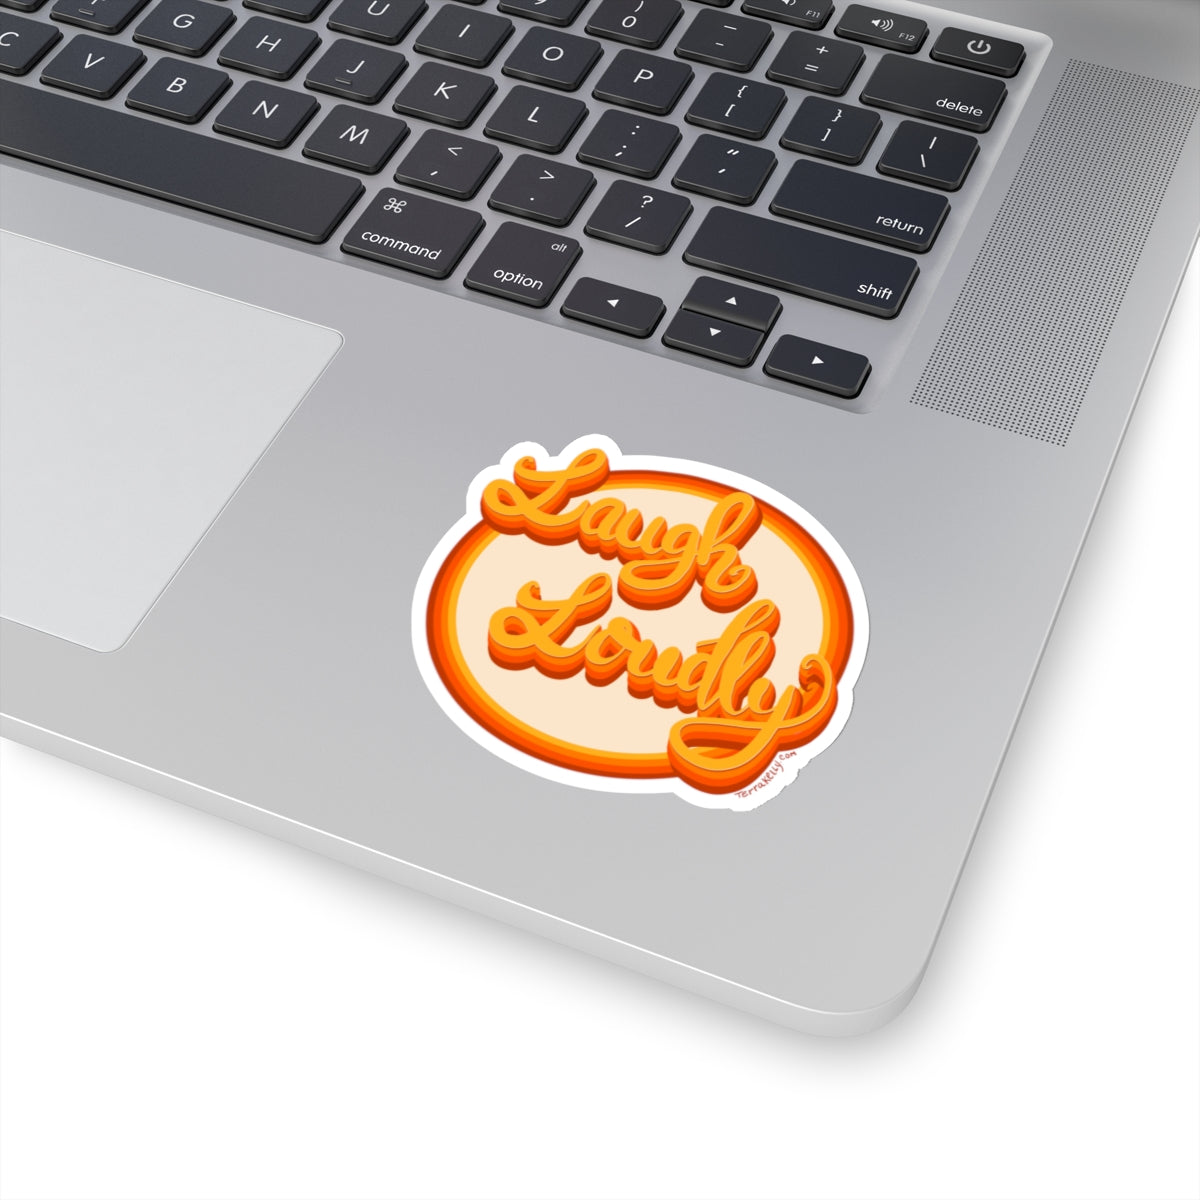 Laugh Loudly Kiss-Cut Stickers | Computer Sticker | Transparent Sticker | FREE SHIPPING